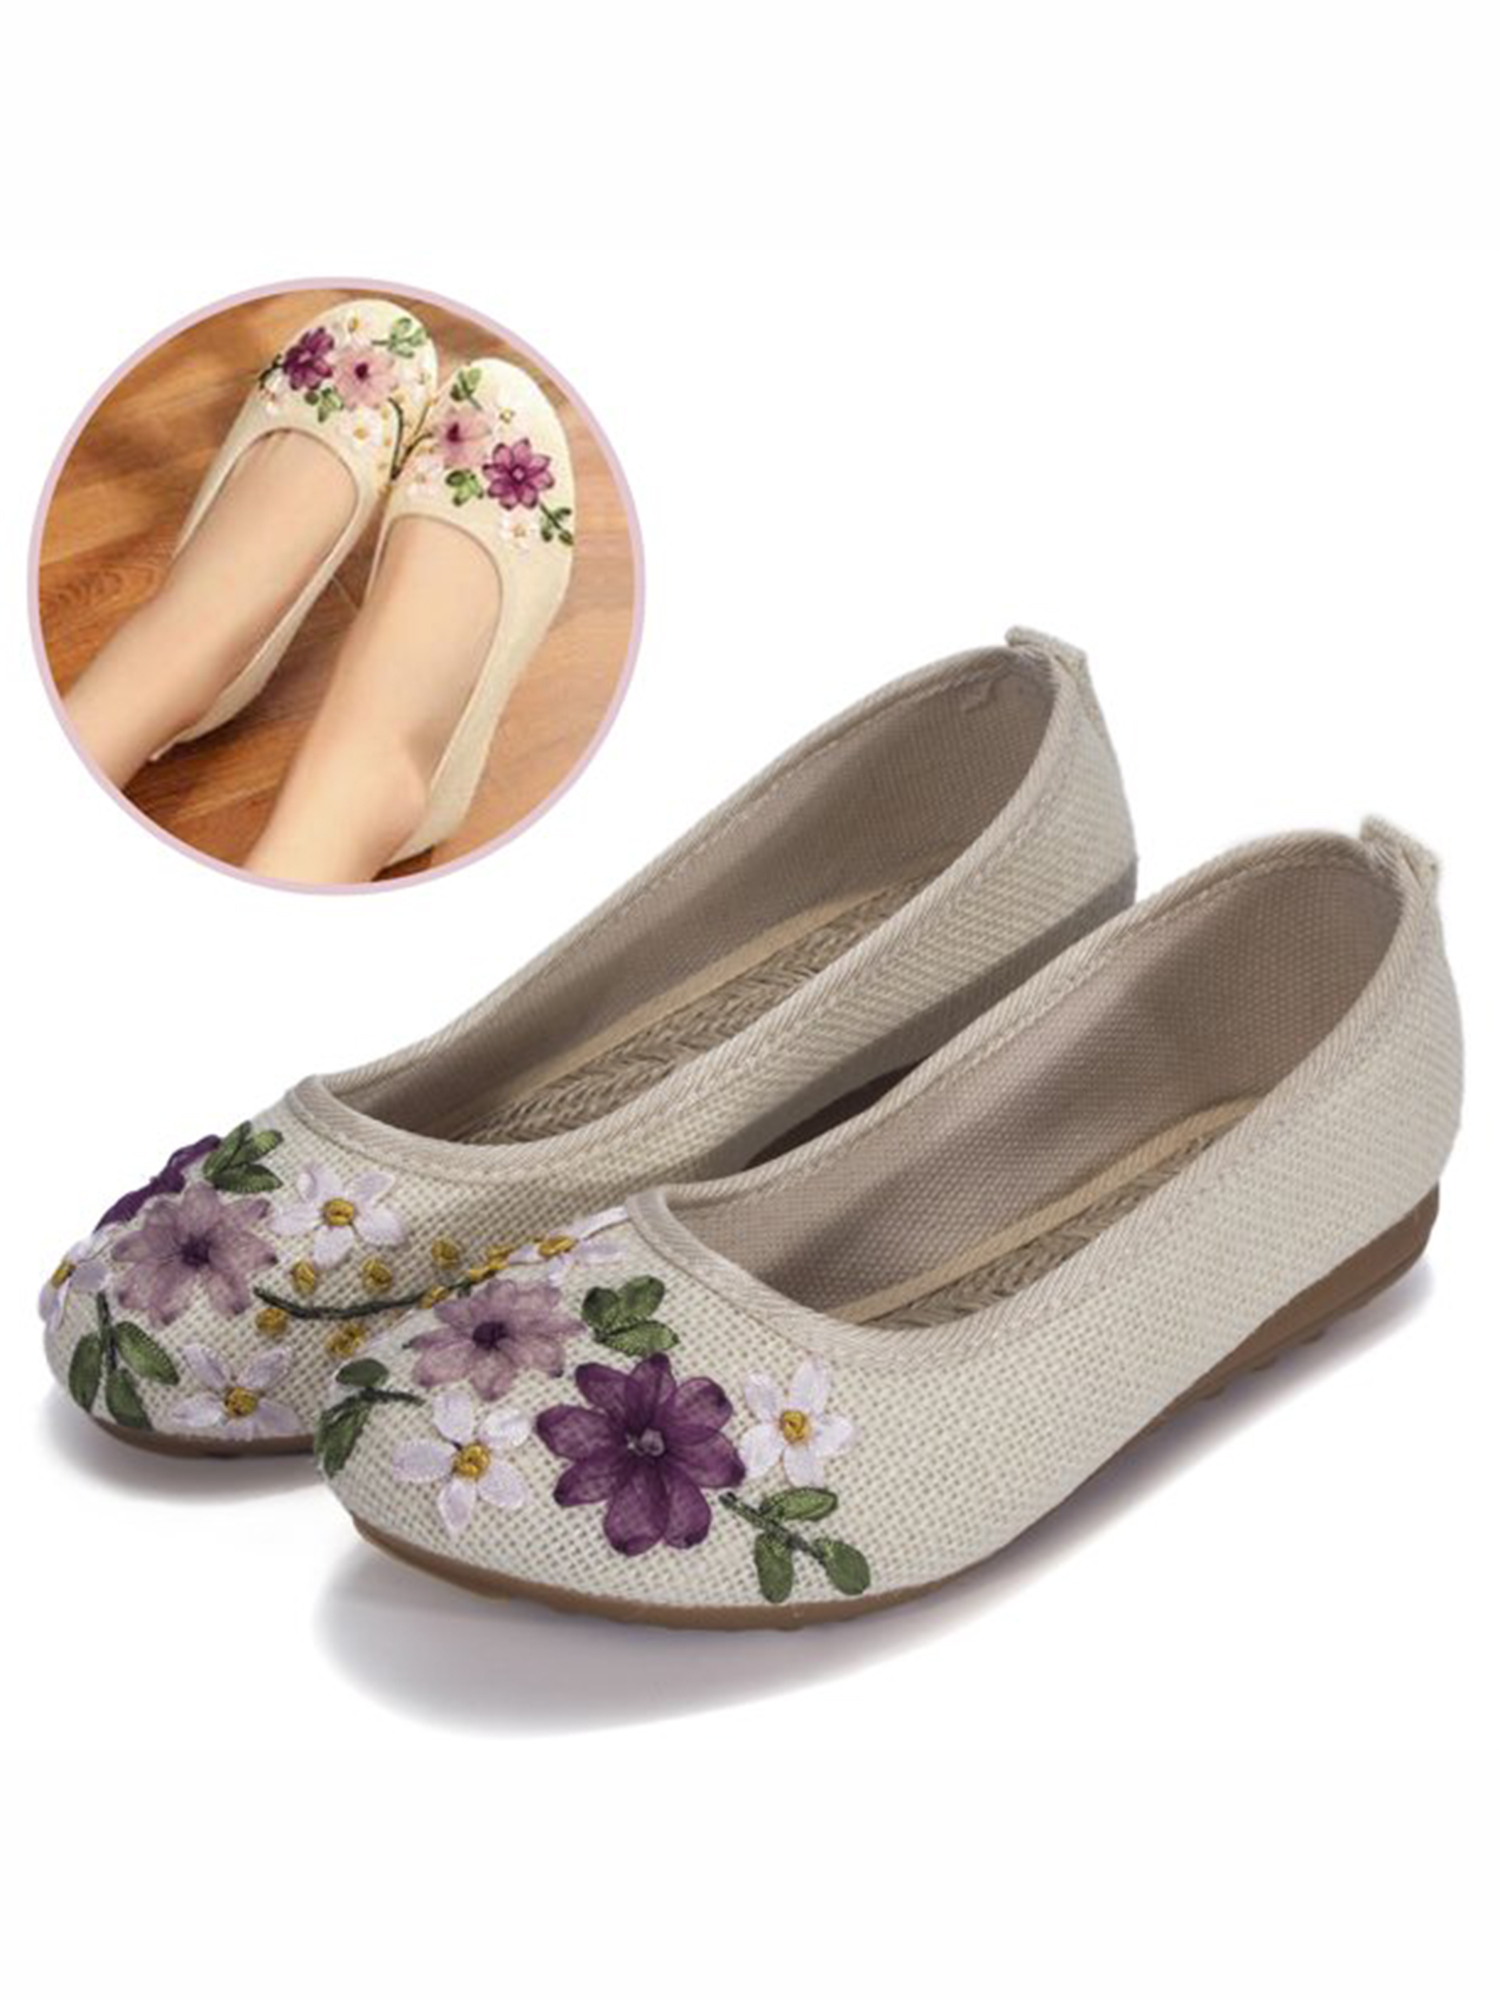 FANNYC Women's Ballet Flats Shoe Slip On Casual Driving Loafers Hemp soled shoes Non-Slip Flat Walking Shoes Slip On Flats Shoes Round Toe Ballet Flats with Delicate Embroidery Flower - image 4 of 7